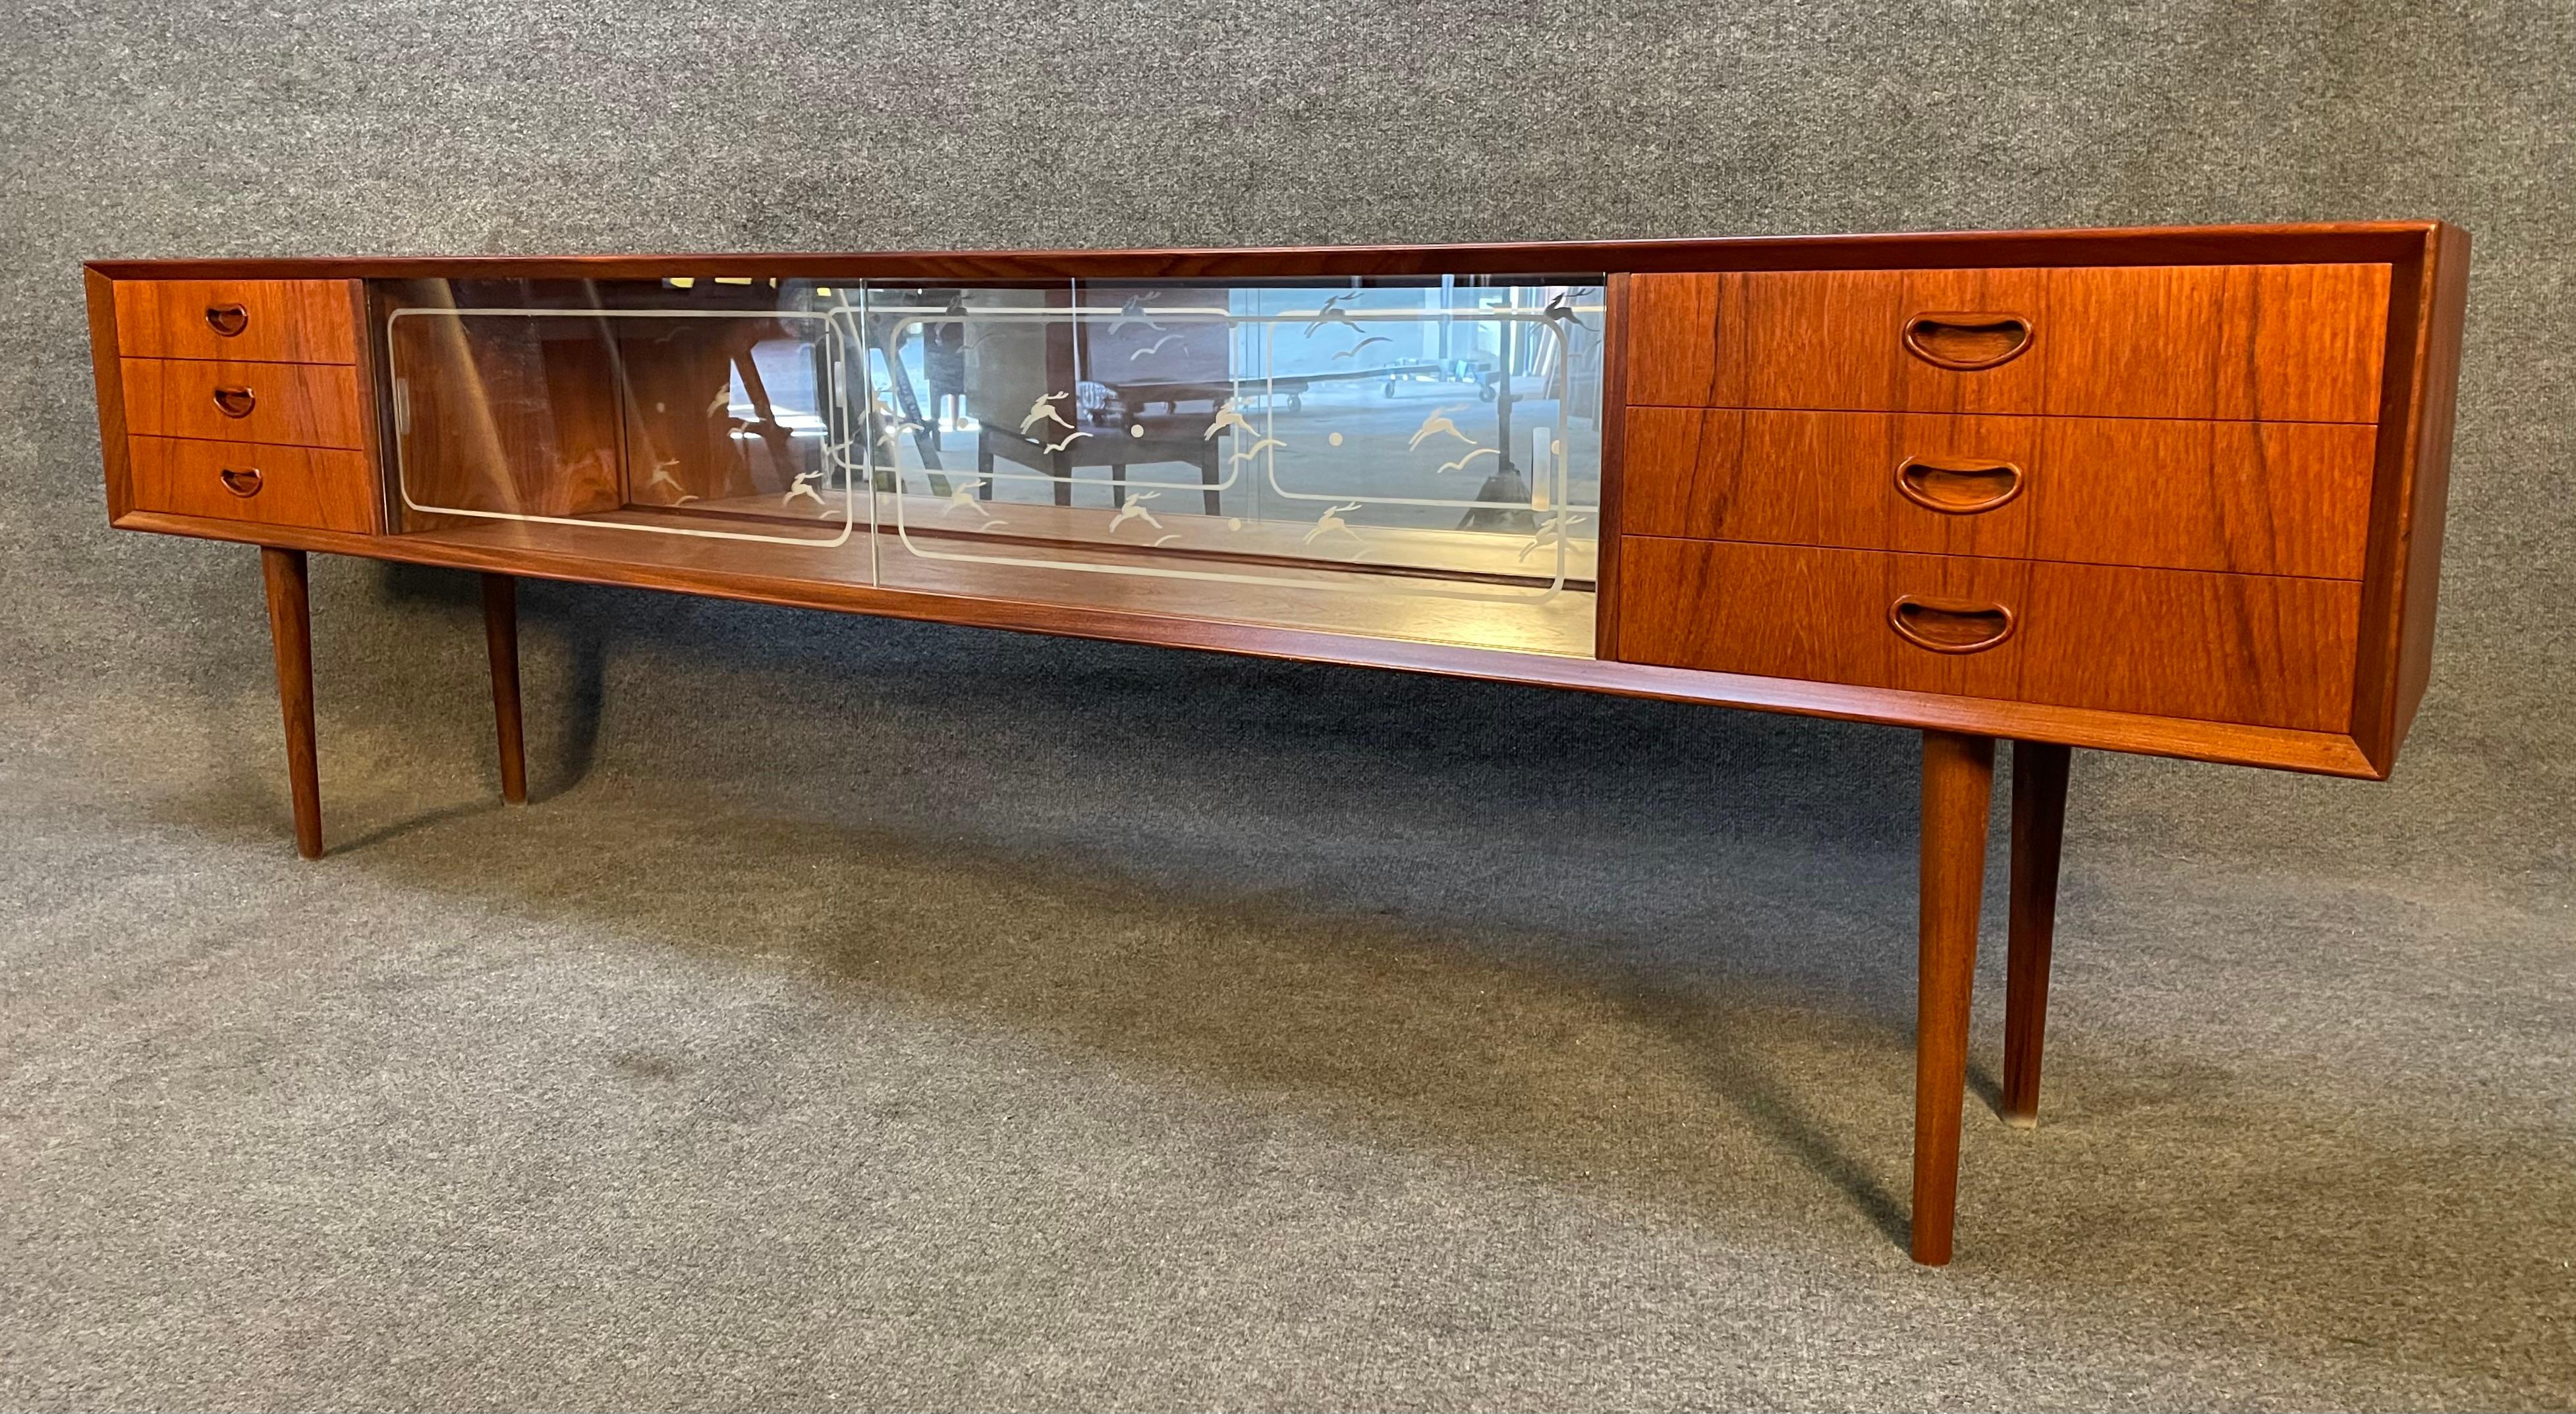 Here is a beautiful long and low 1960's Scandinavian sideboard in teak reminiscent of Peter Hvidt's design.
This credenza, recently imported from Europe to California before its refinishing, features a vibrant wood grain, two banks of three dove